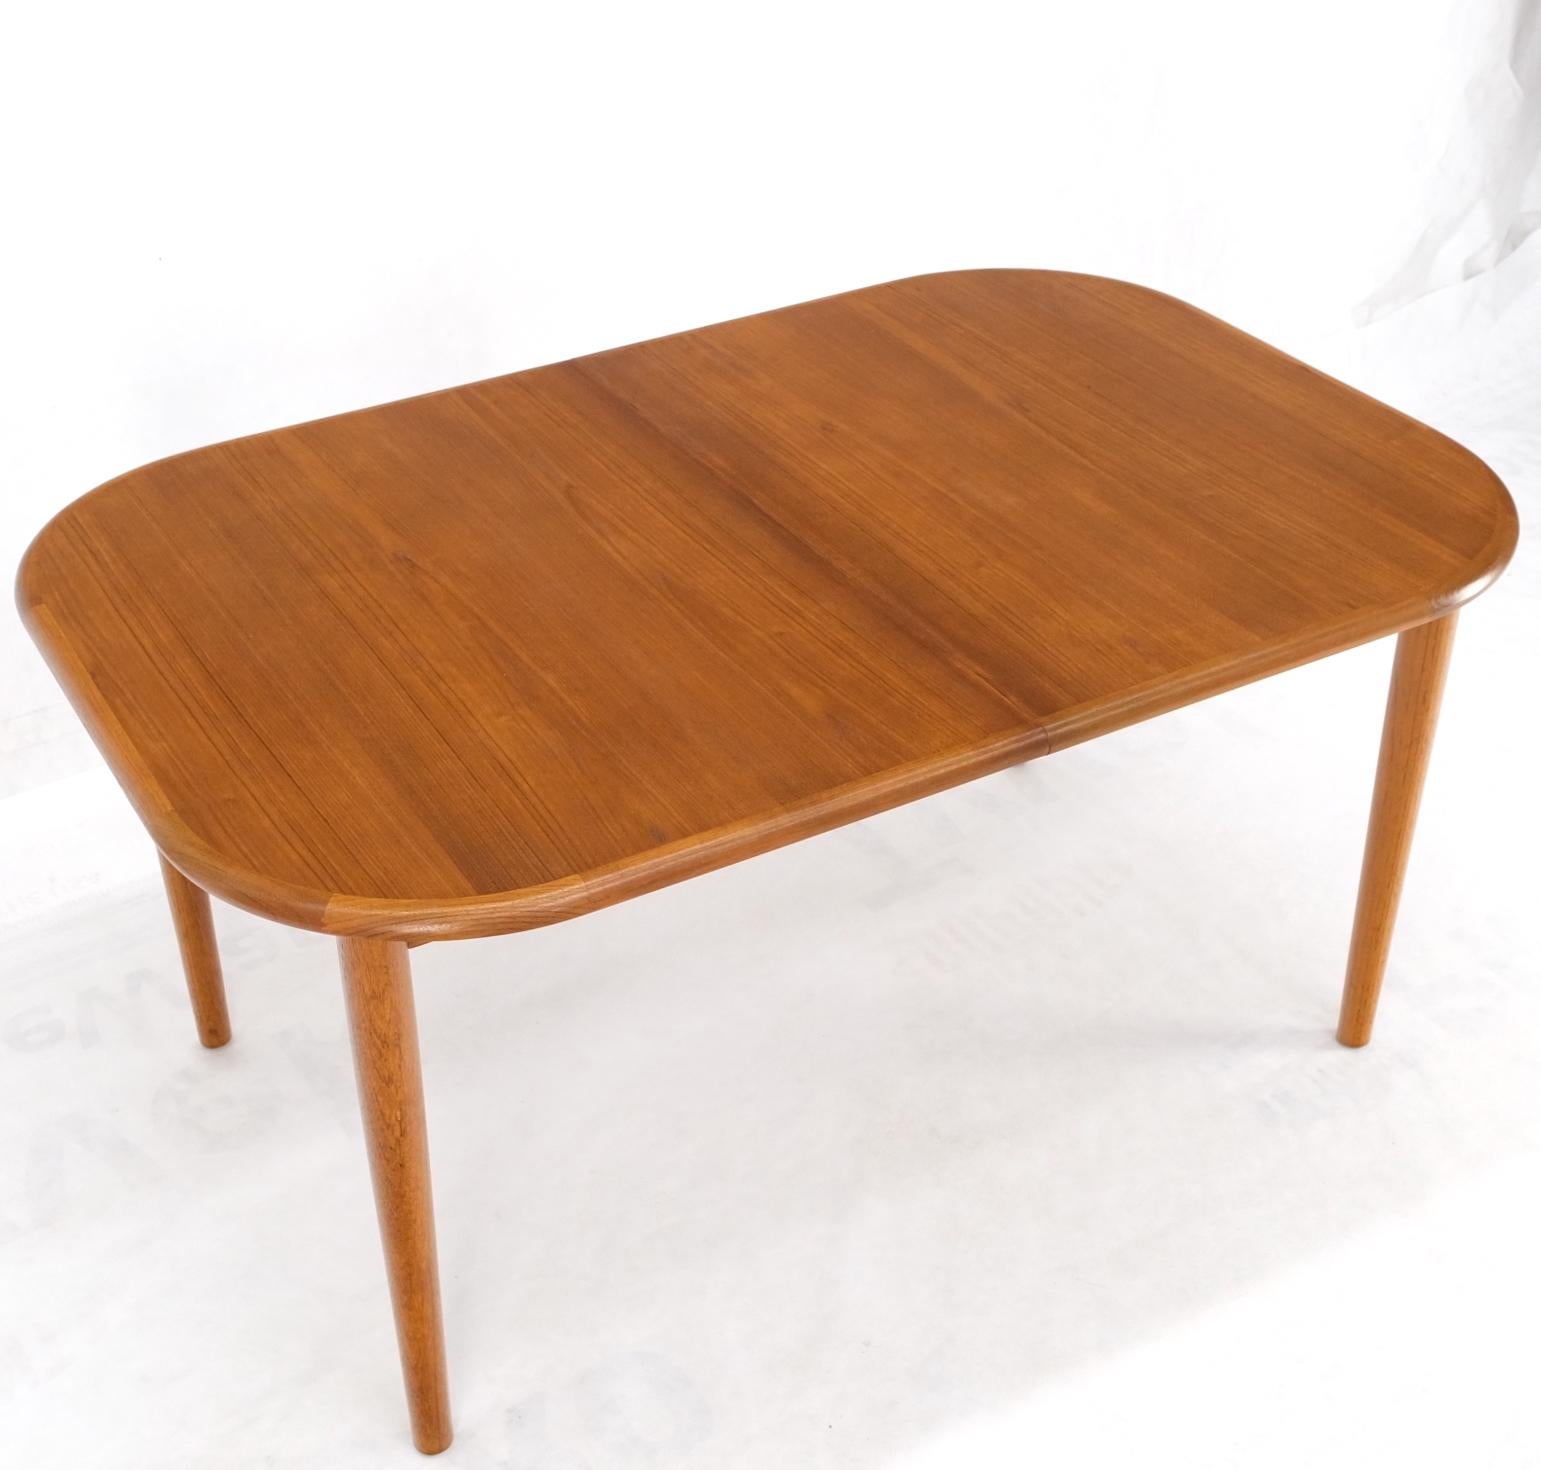 Danish Teak Rounded Corners Rectangle Dining Table One Hide Away Board Leaf Mint For Sale 2